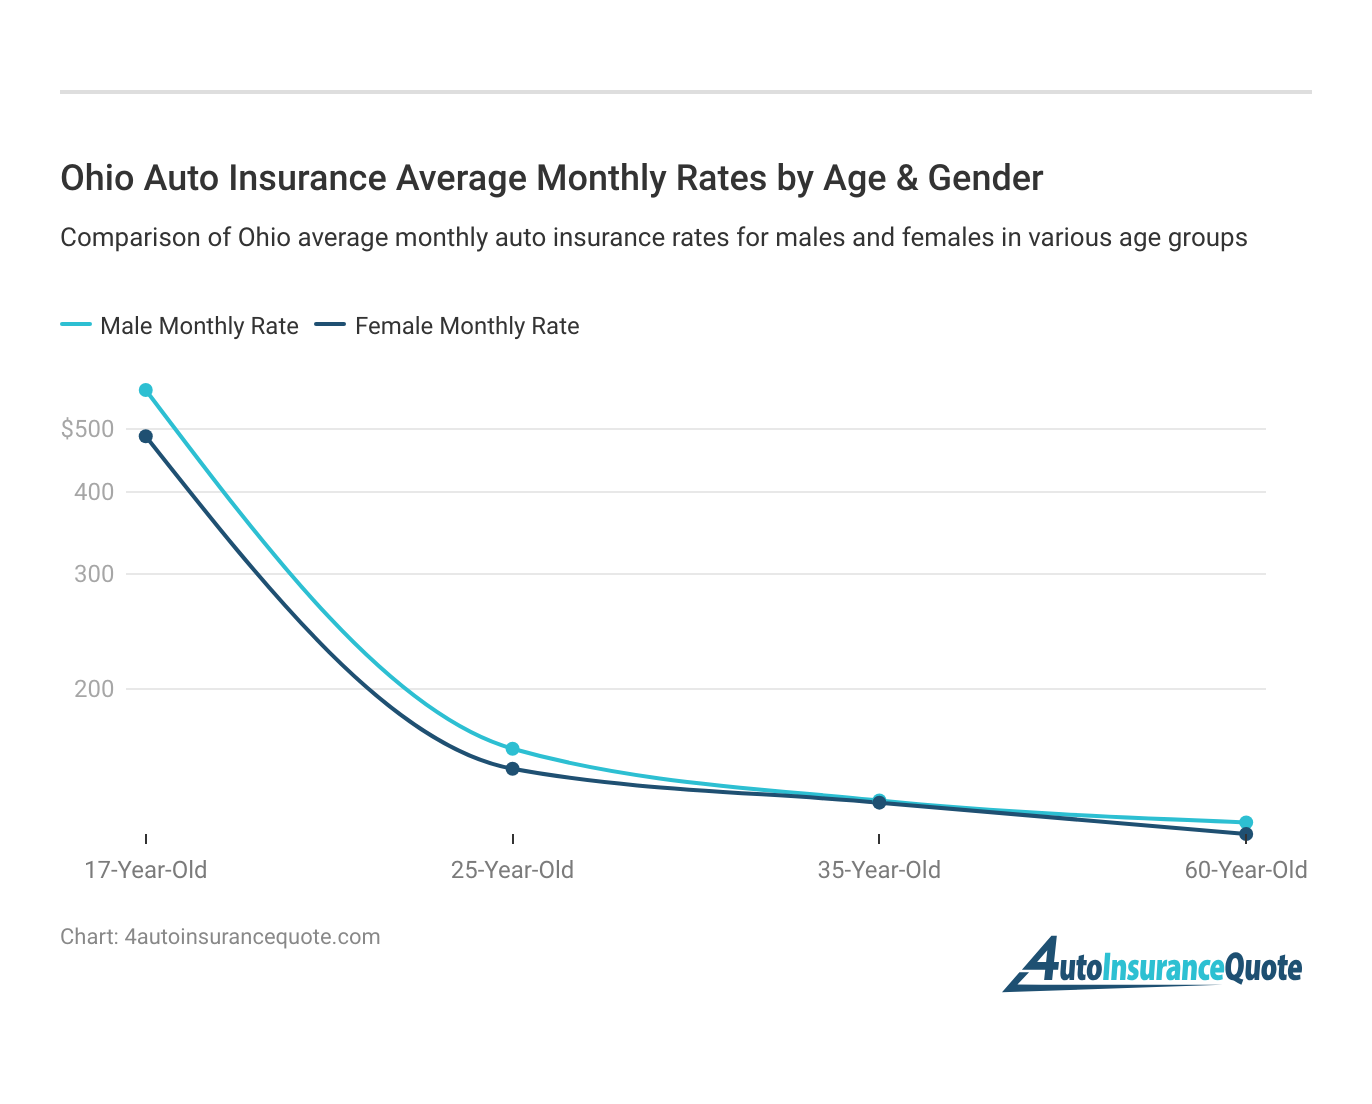 <h3>Ohio Auto Insurance Average Monthly Rates by Age & Gender</h3>